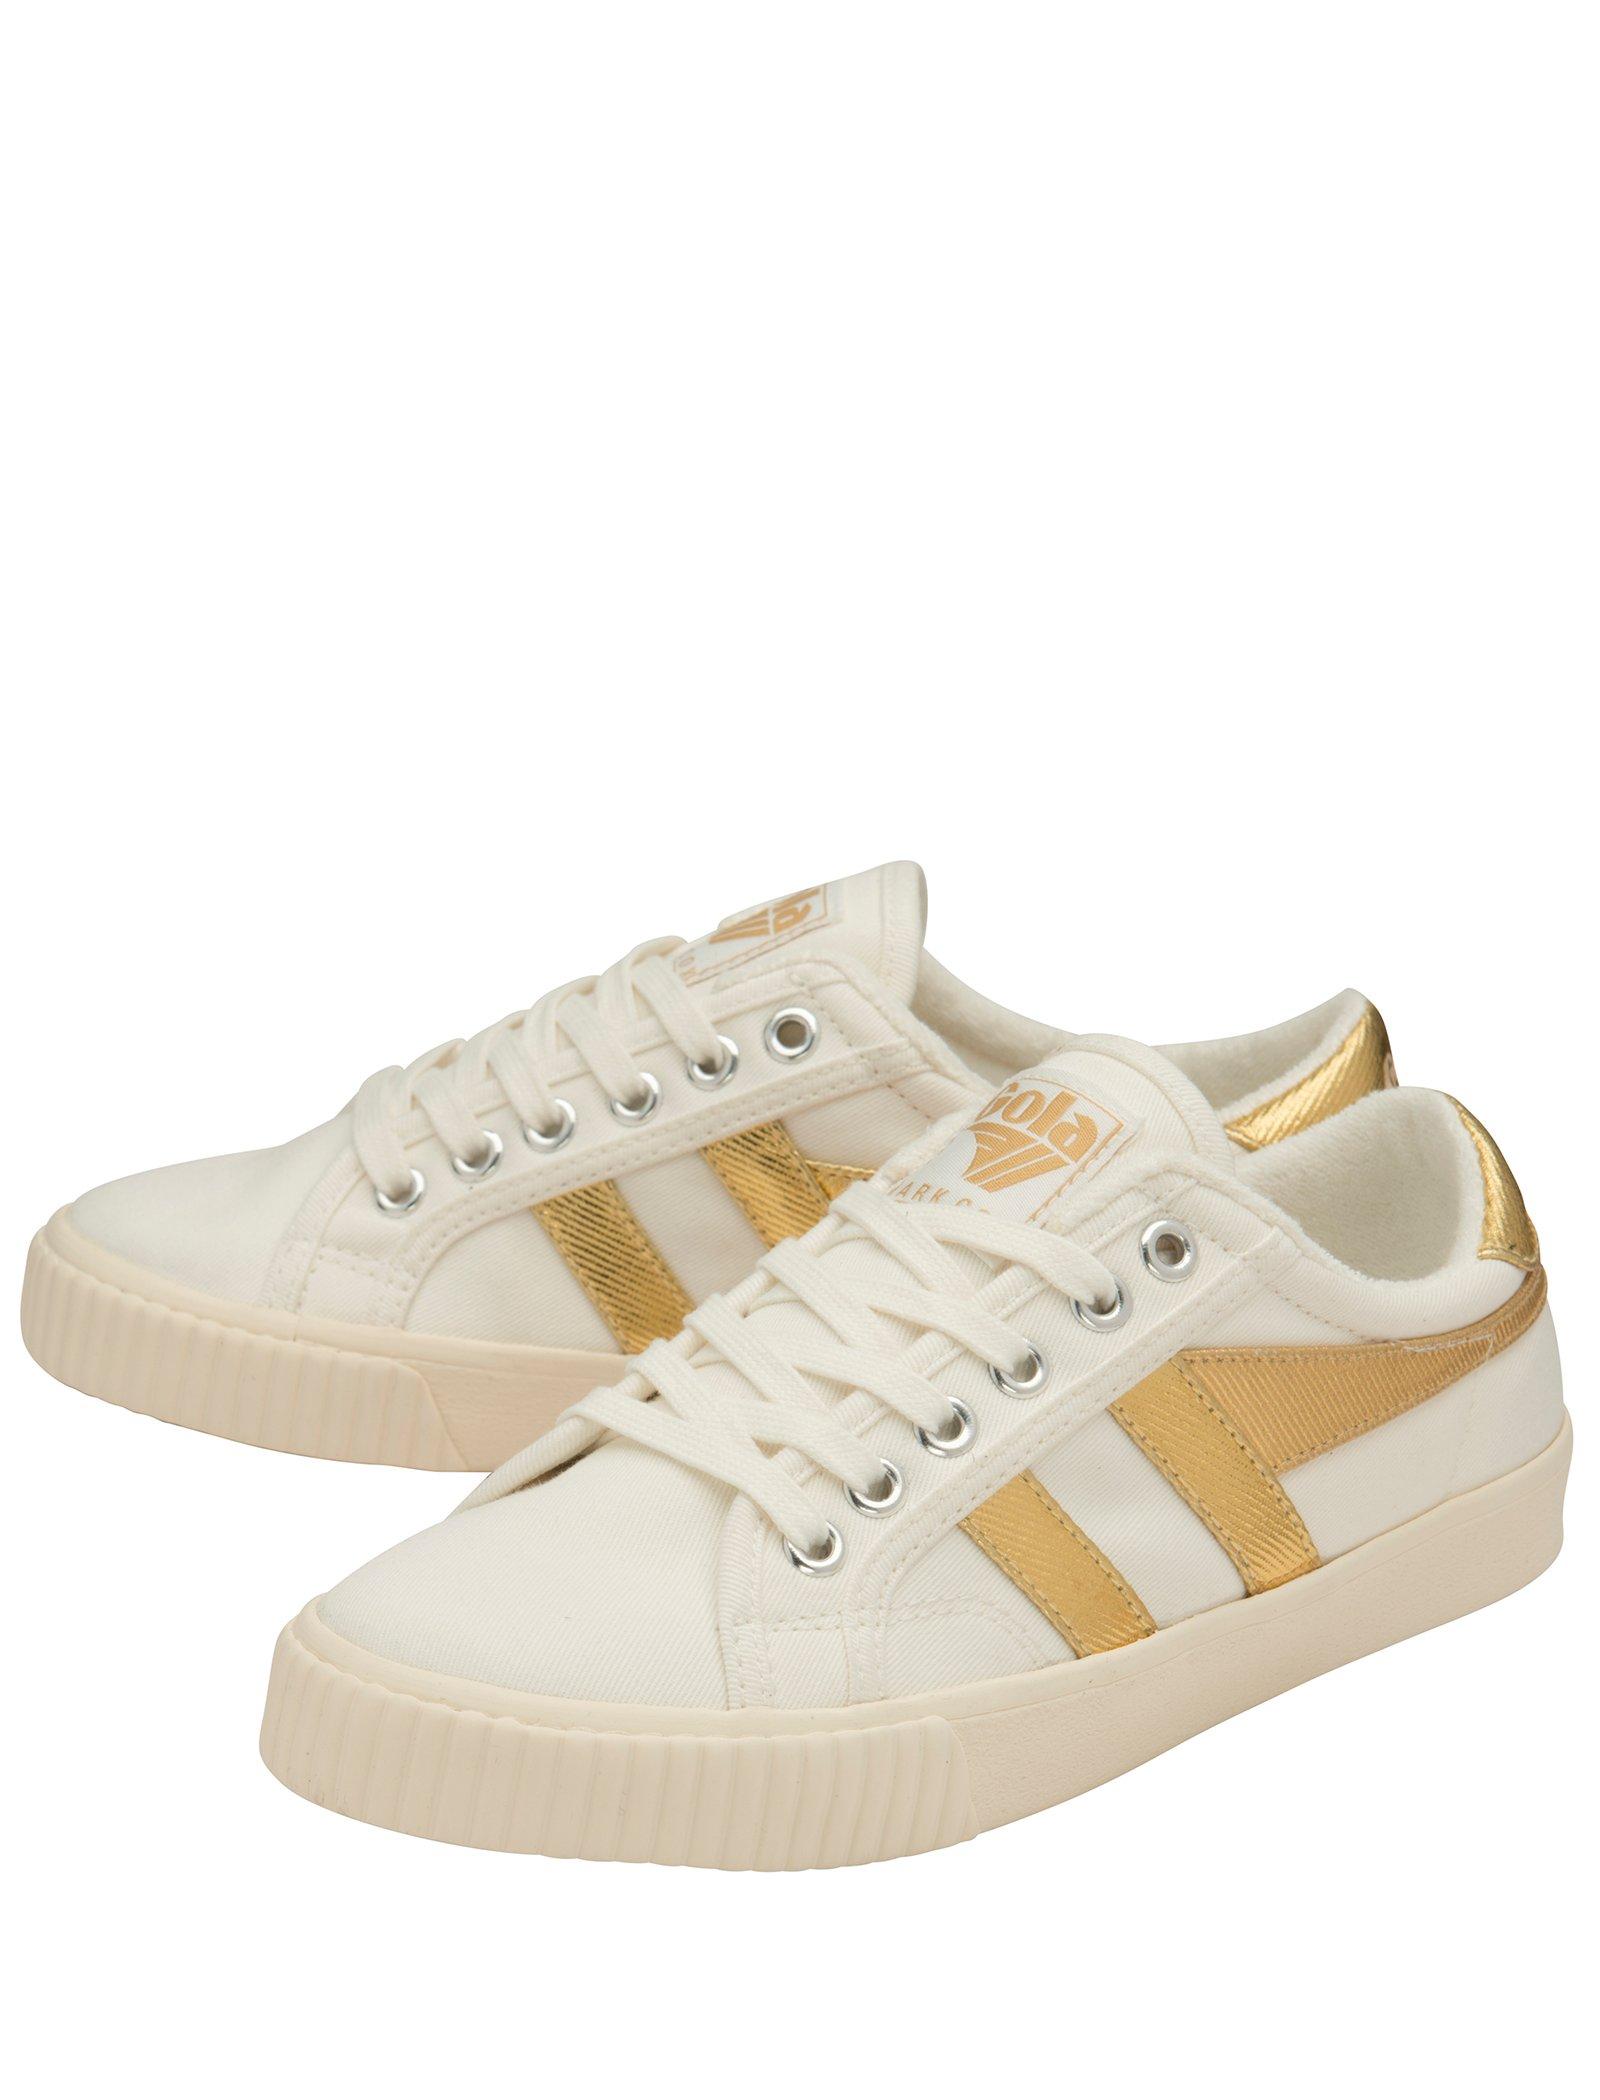 gola canvas sneakers